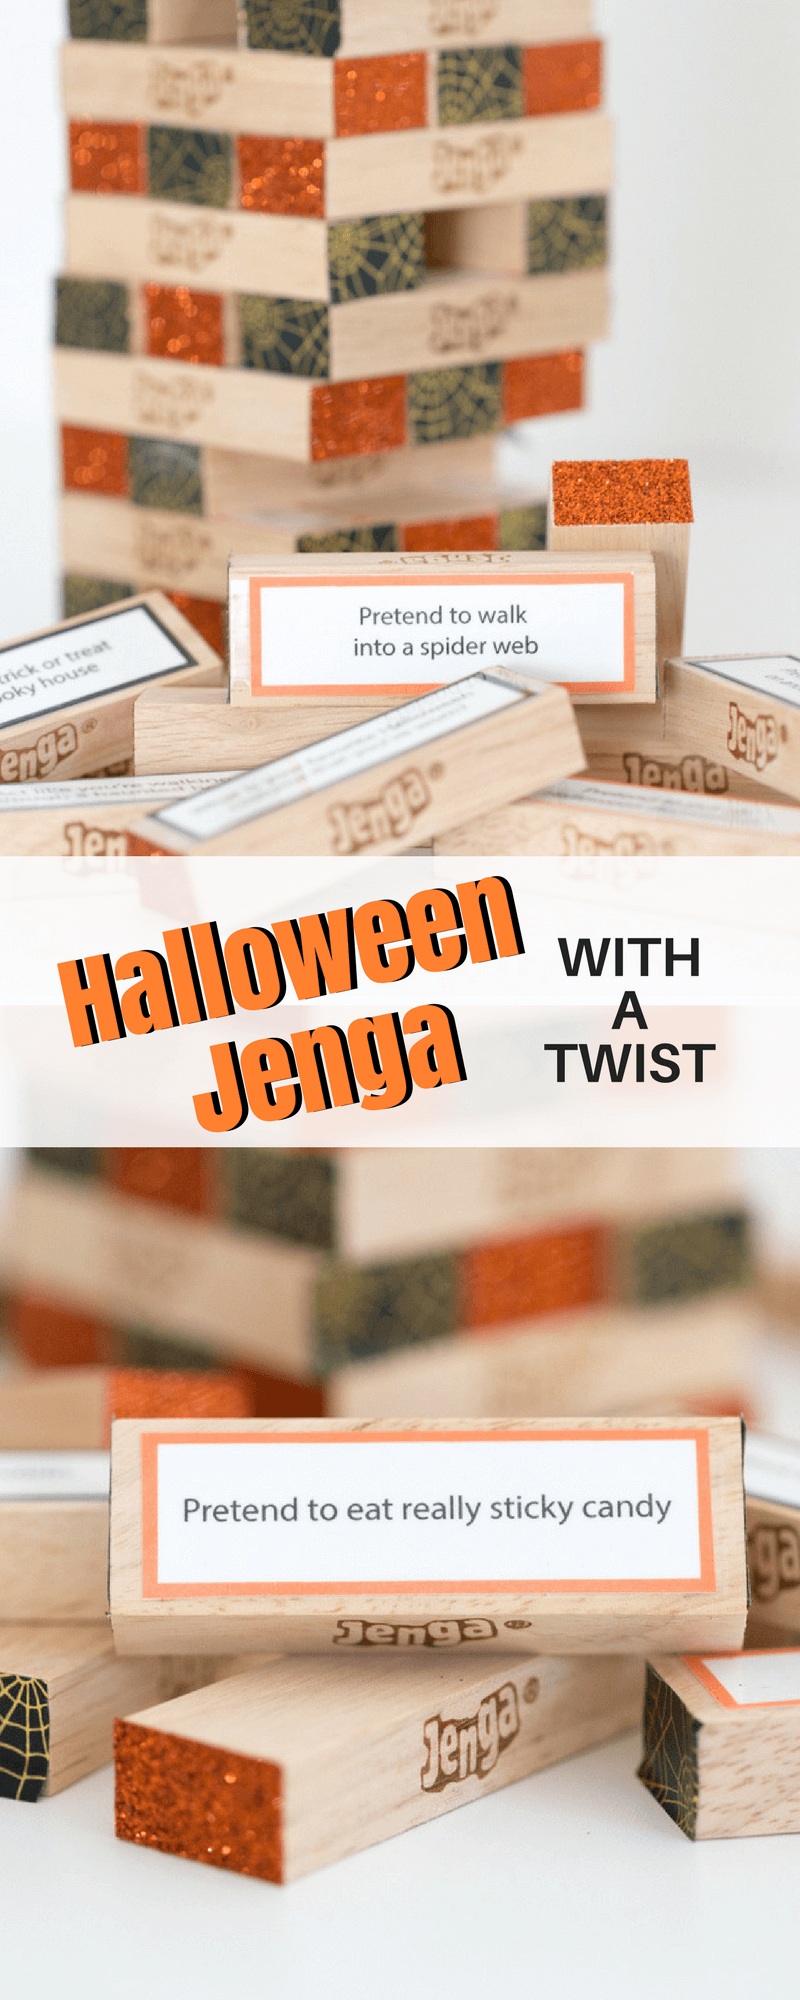 Looking for the perfect Halloween Party Game Idea? This DIY Halloween Jenga with a twist is a fun and festive game that your whole family is sure to enjoy!